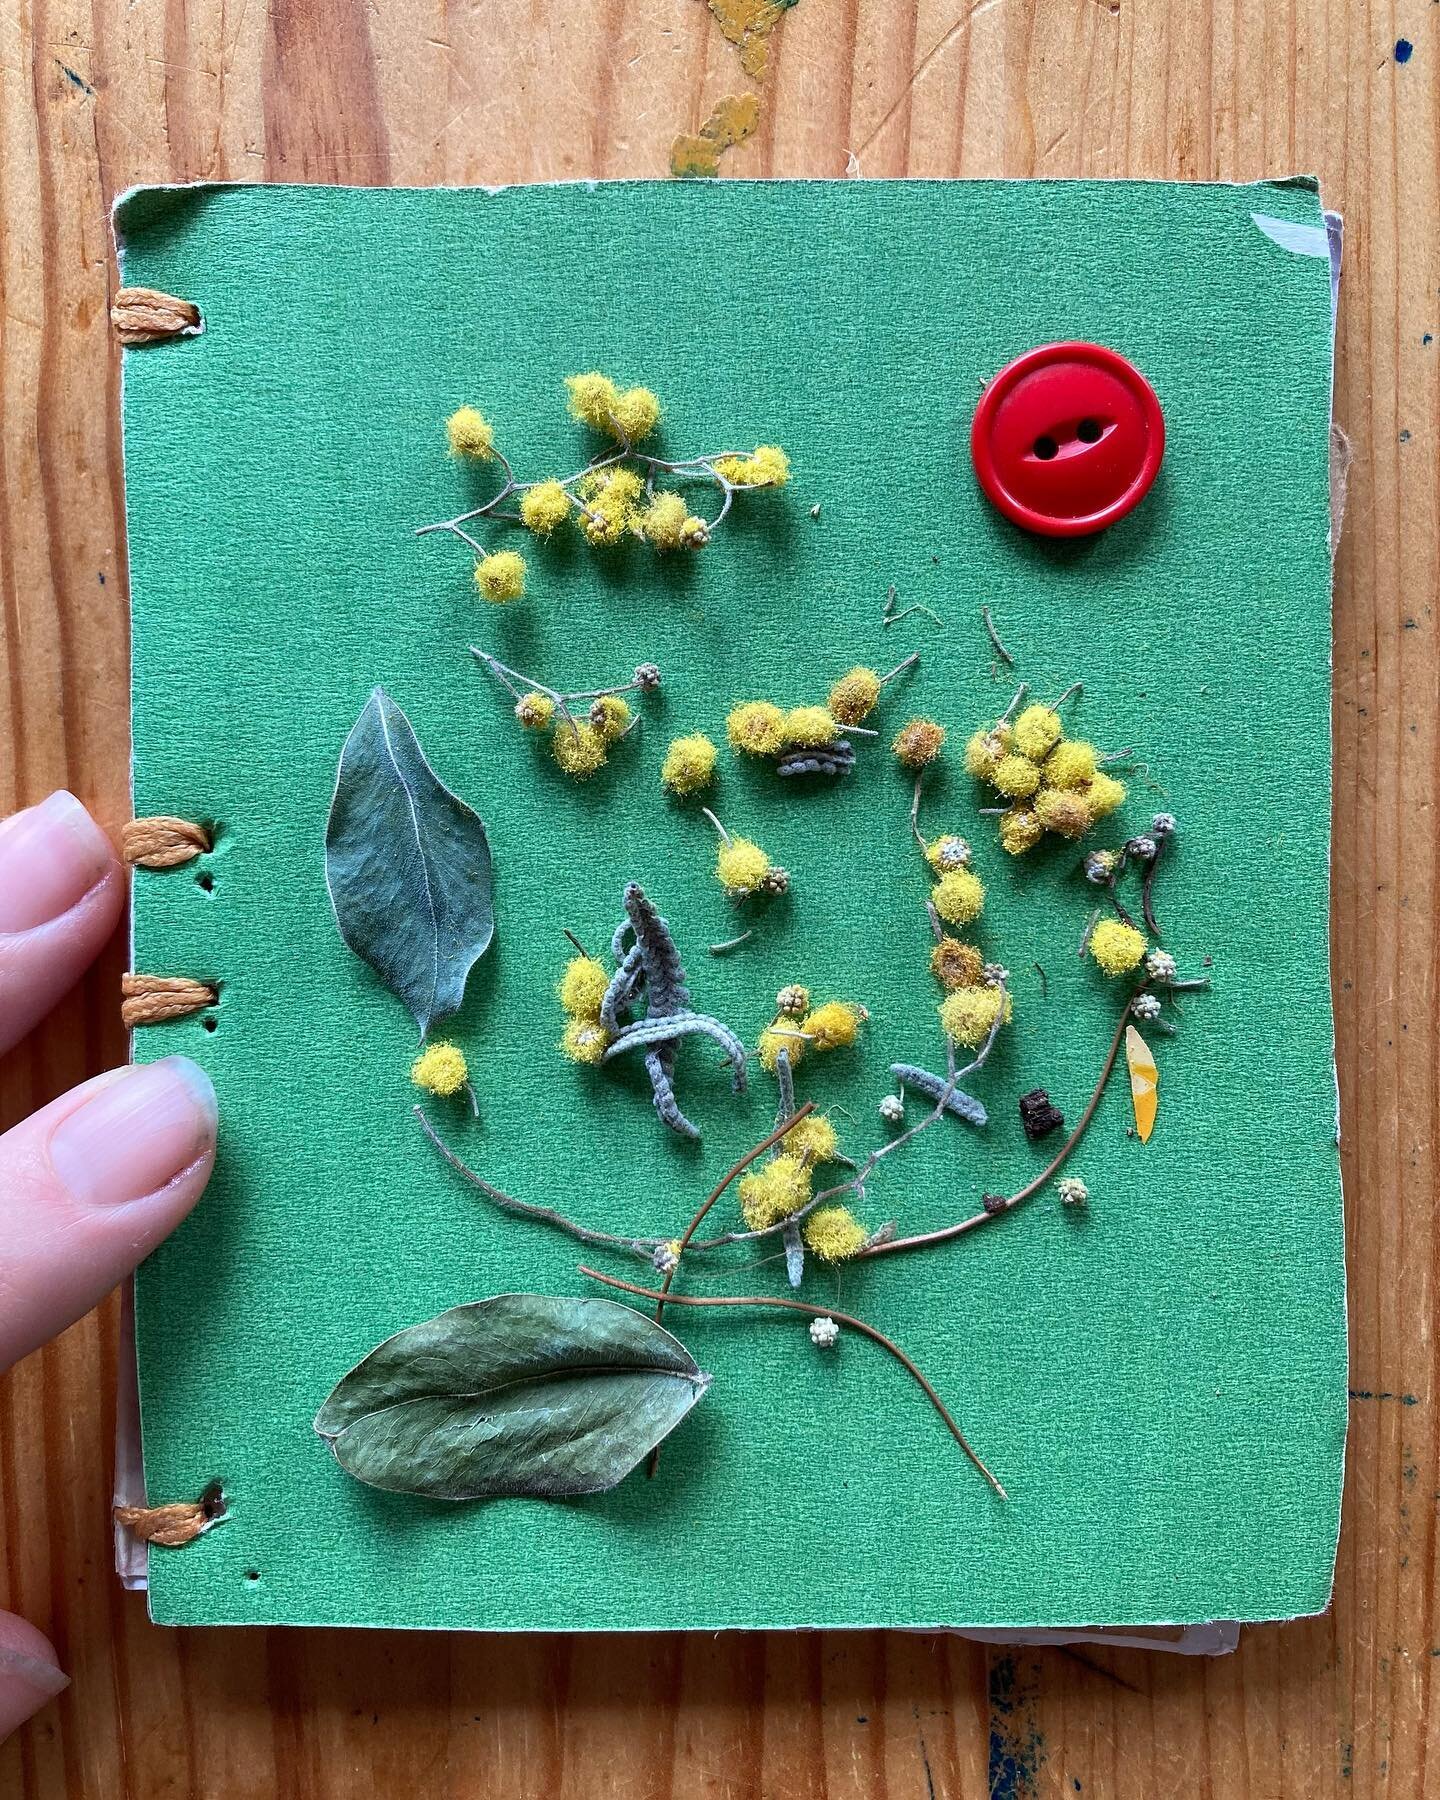 A small gathering 🍂

Remnants of a dried wattle sprig, a red  antique button gathered on a green handmade book, touched by my presence, captured for a moment in time. 

#ephemeralart #arttherapylife #presence #creativearttherapy #acacia #wattle #aca